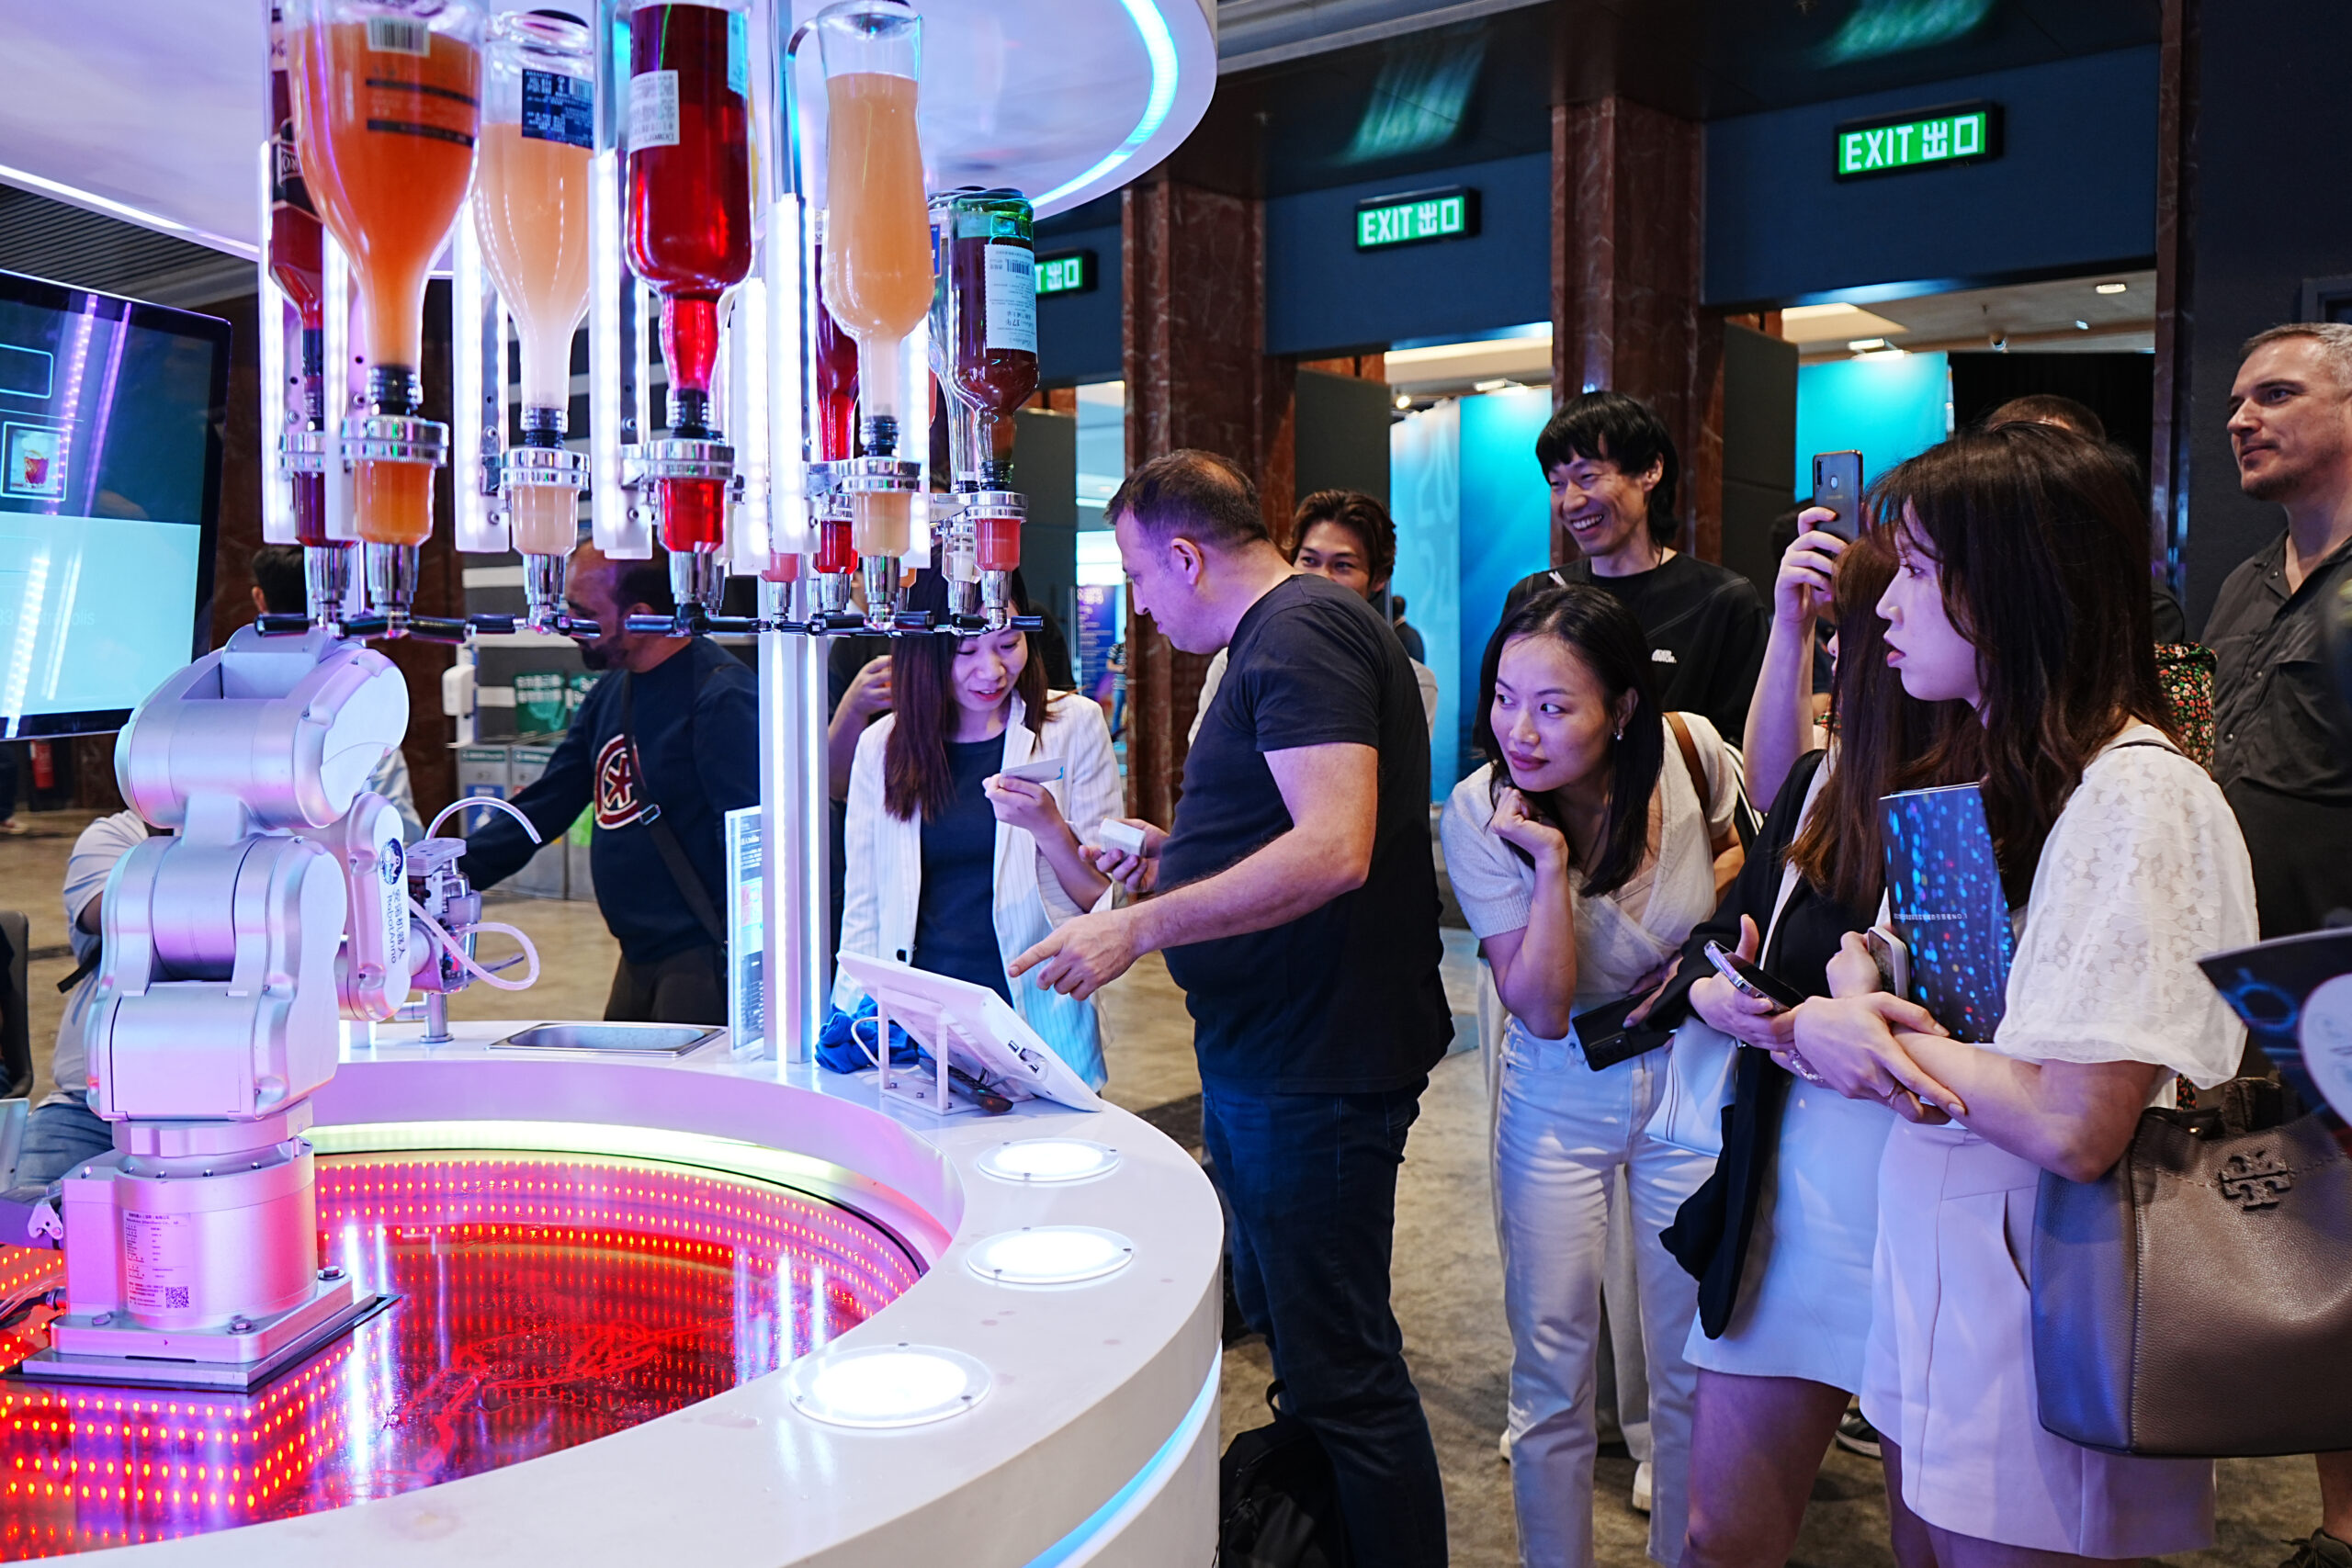 The bartender robot looks too cute to visitors!